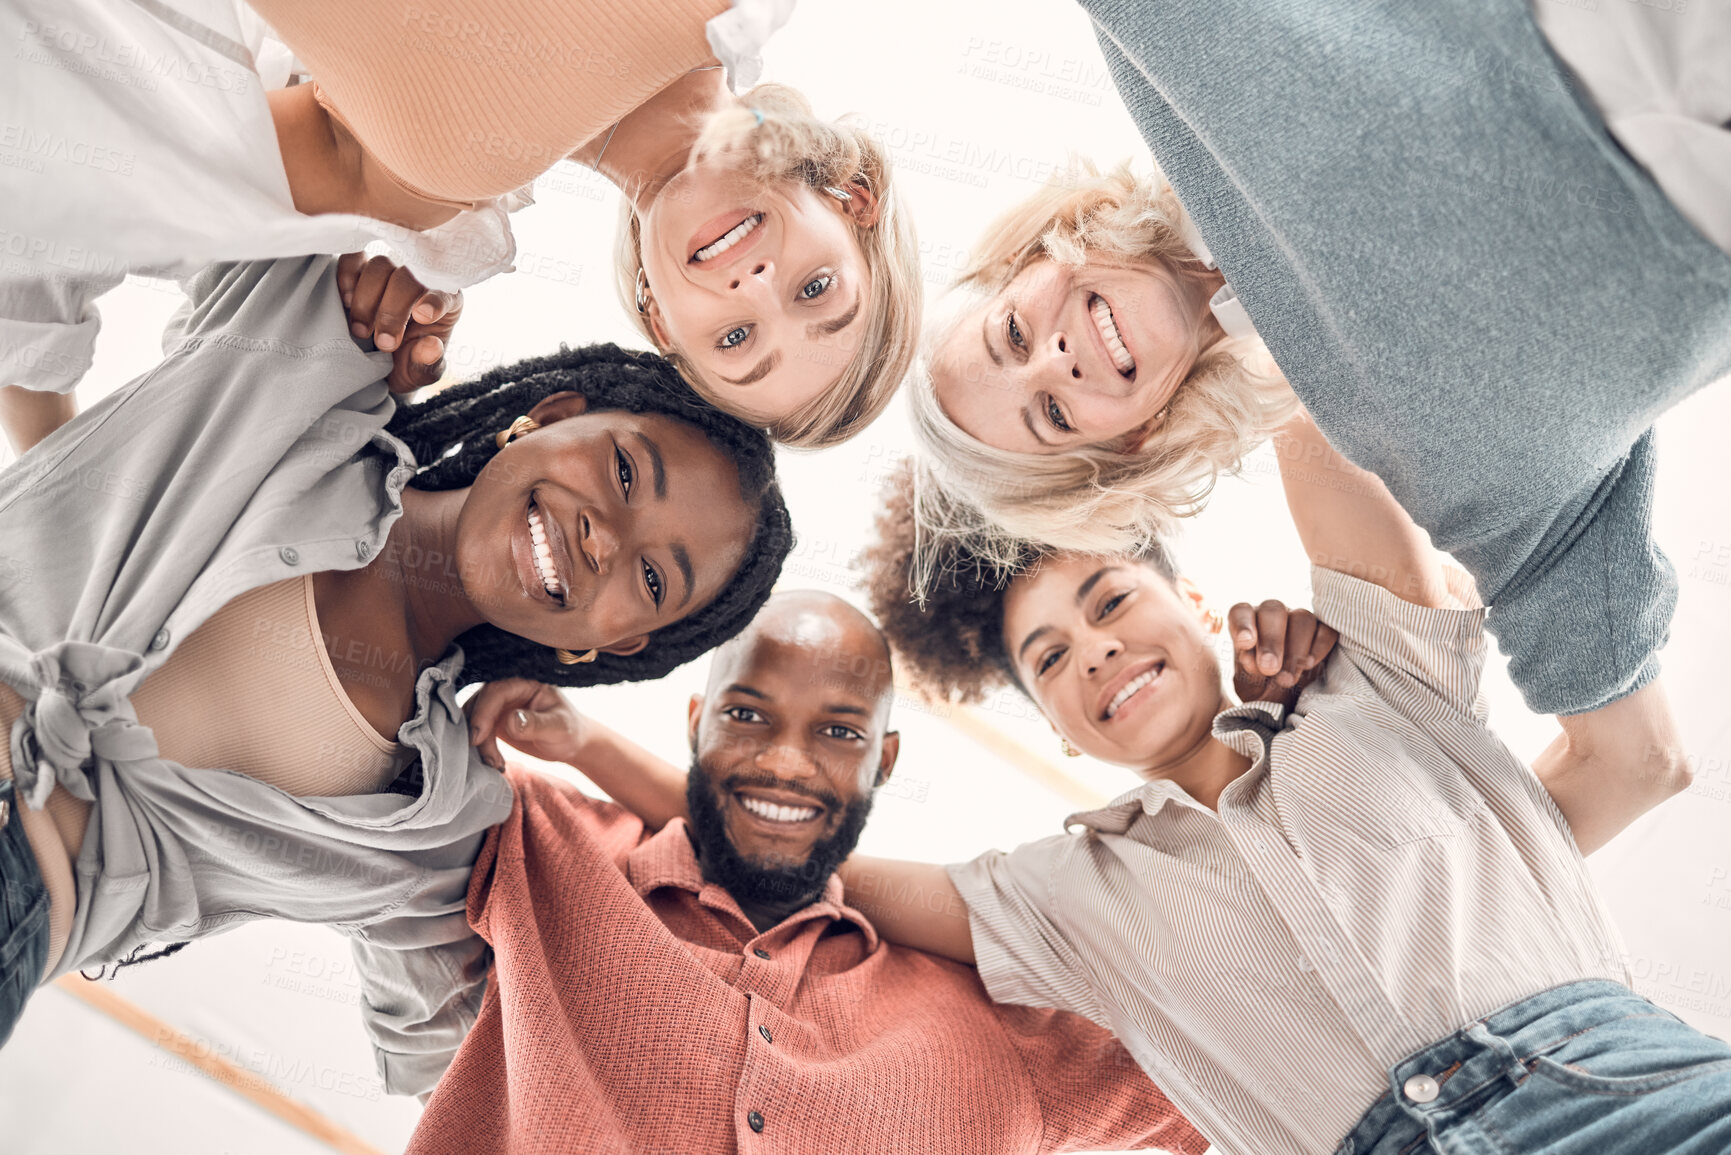 Buy stock photo Low portrait of a group of five cheerful diverse businesspeople standing together in an office at work. Happy business professionals standing at work. Colleagues huddling together in support and motivation